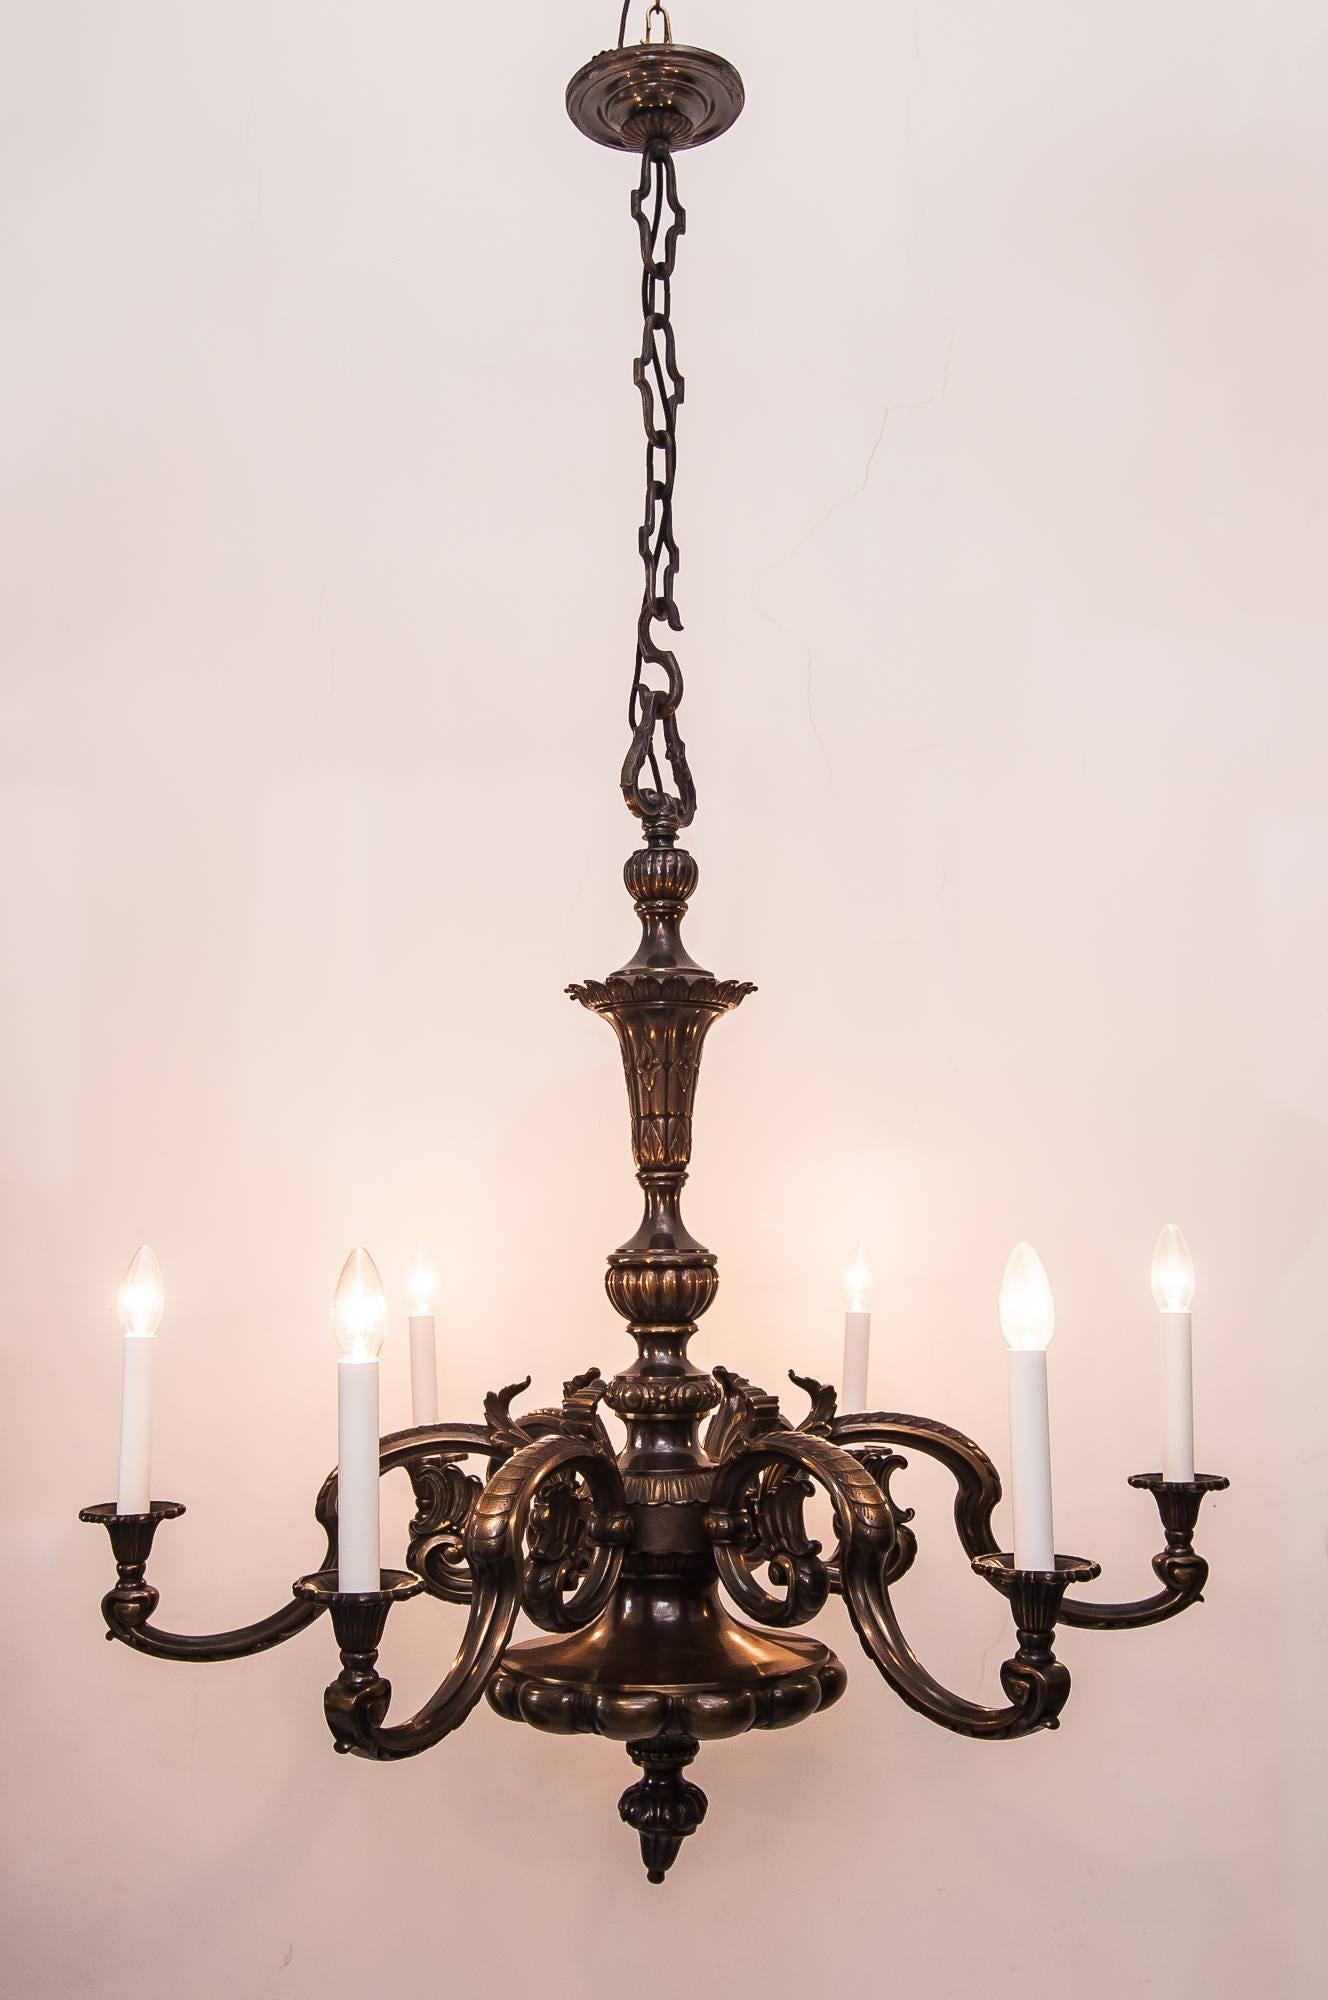 Huge historistic bronze chandelier, circa 1890s.
Very nice original patina
Original condition
Only the wire is new.
 